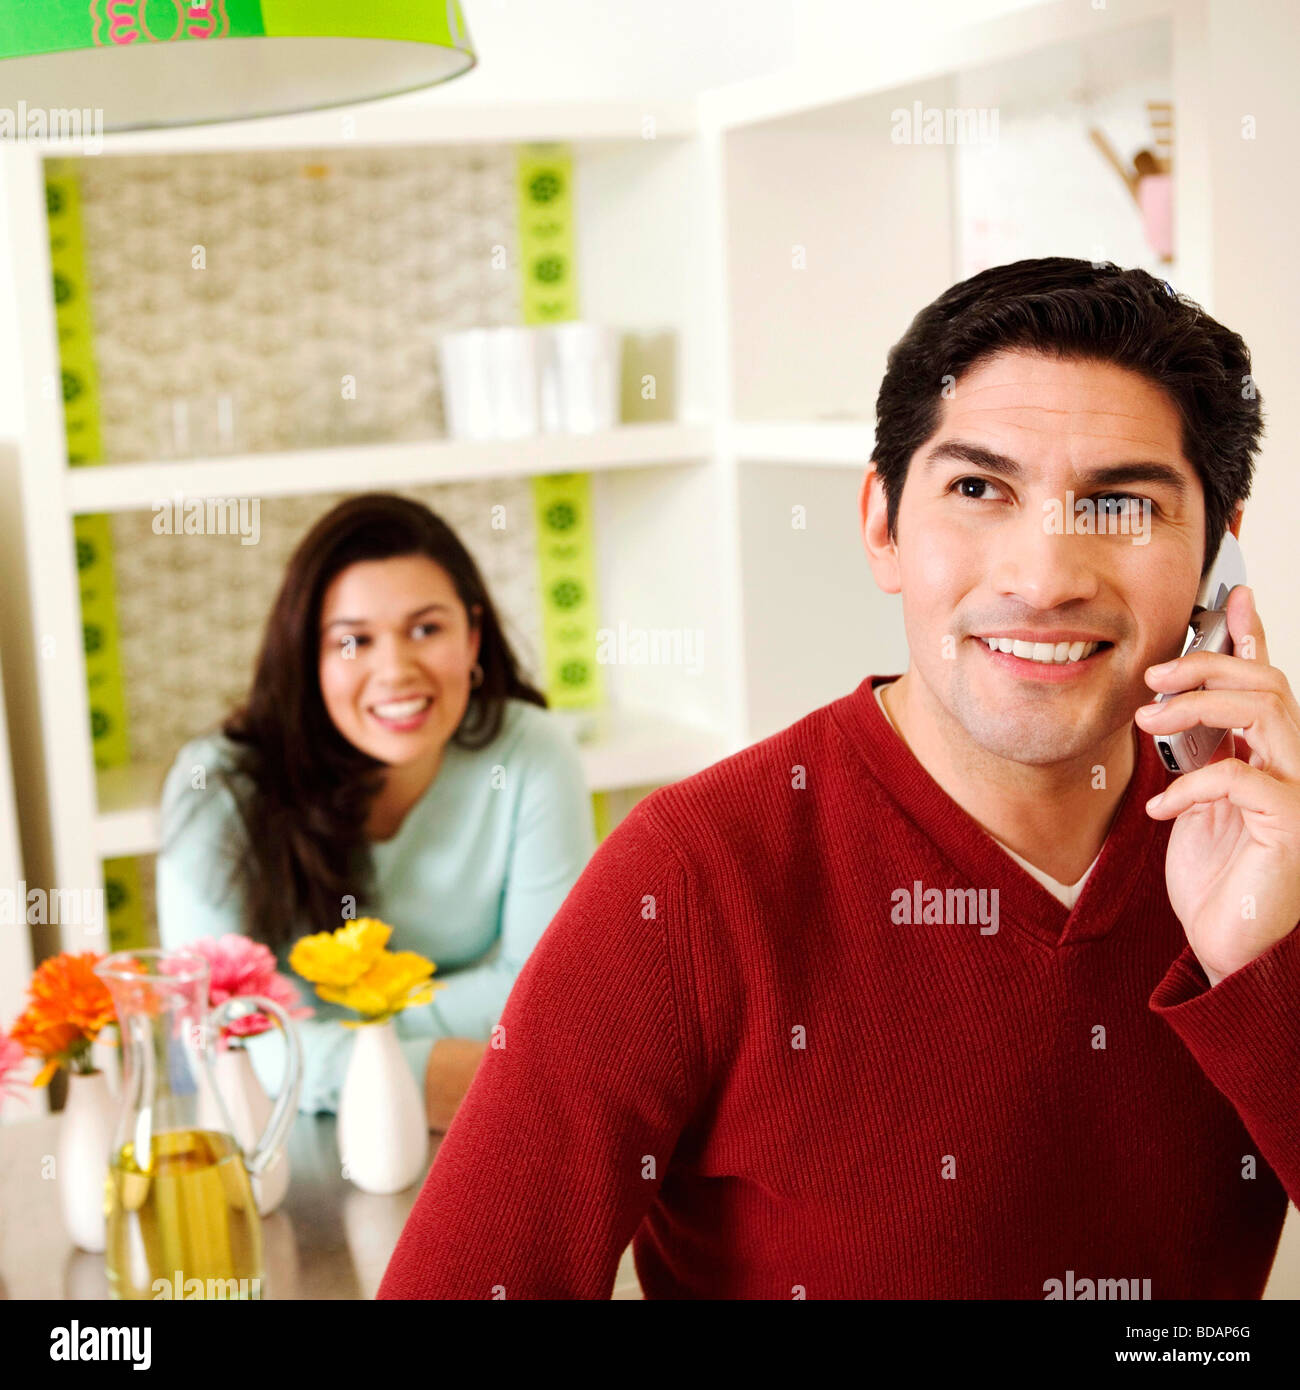 Mid adult man talking on a mobile phone with a mid adult woman smiling in the background Stock Photo